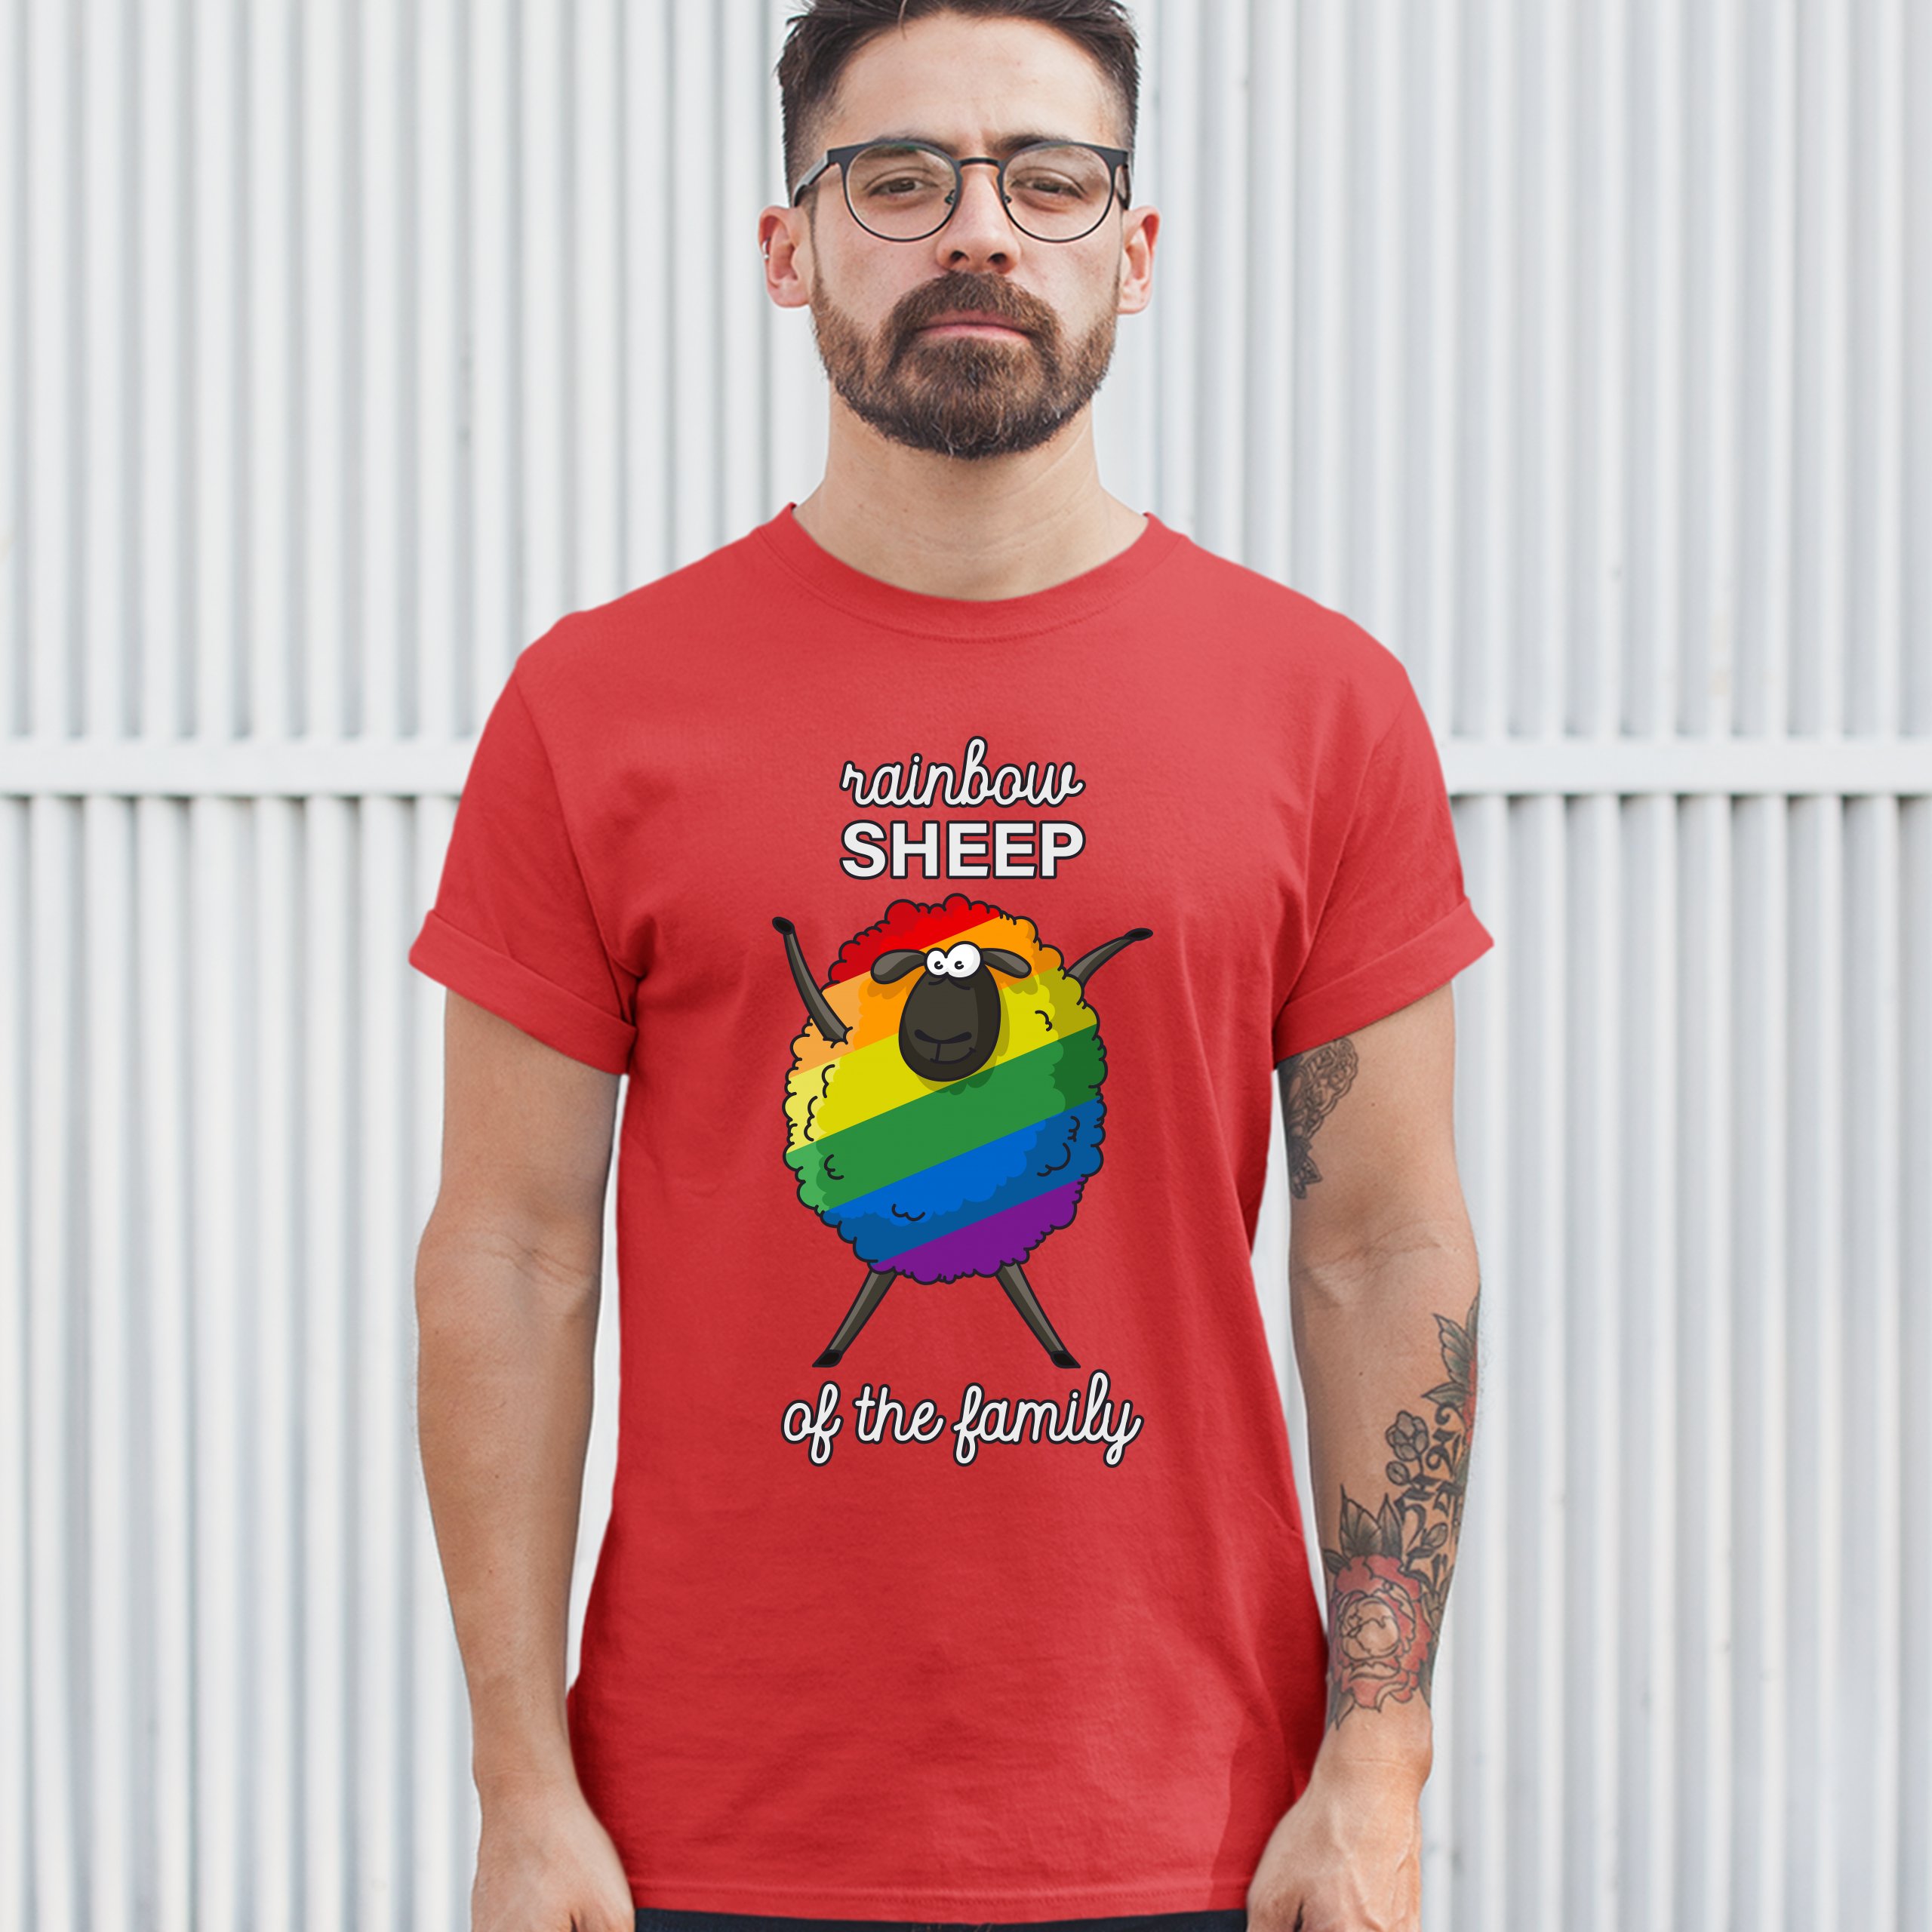 Rainbow Sheep of the Family T-shirt Gay Pride LGBT Support Funny Men's Tee